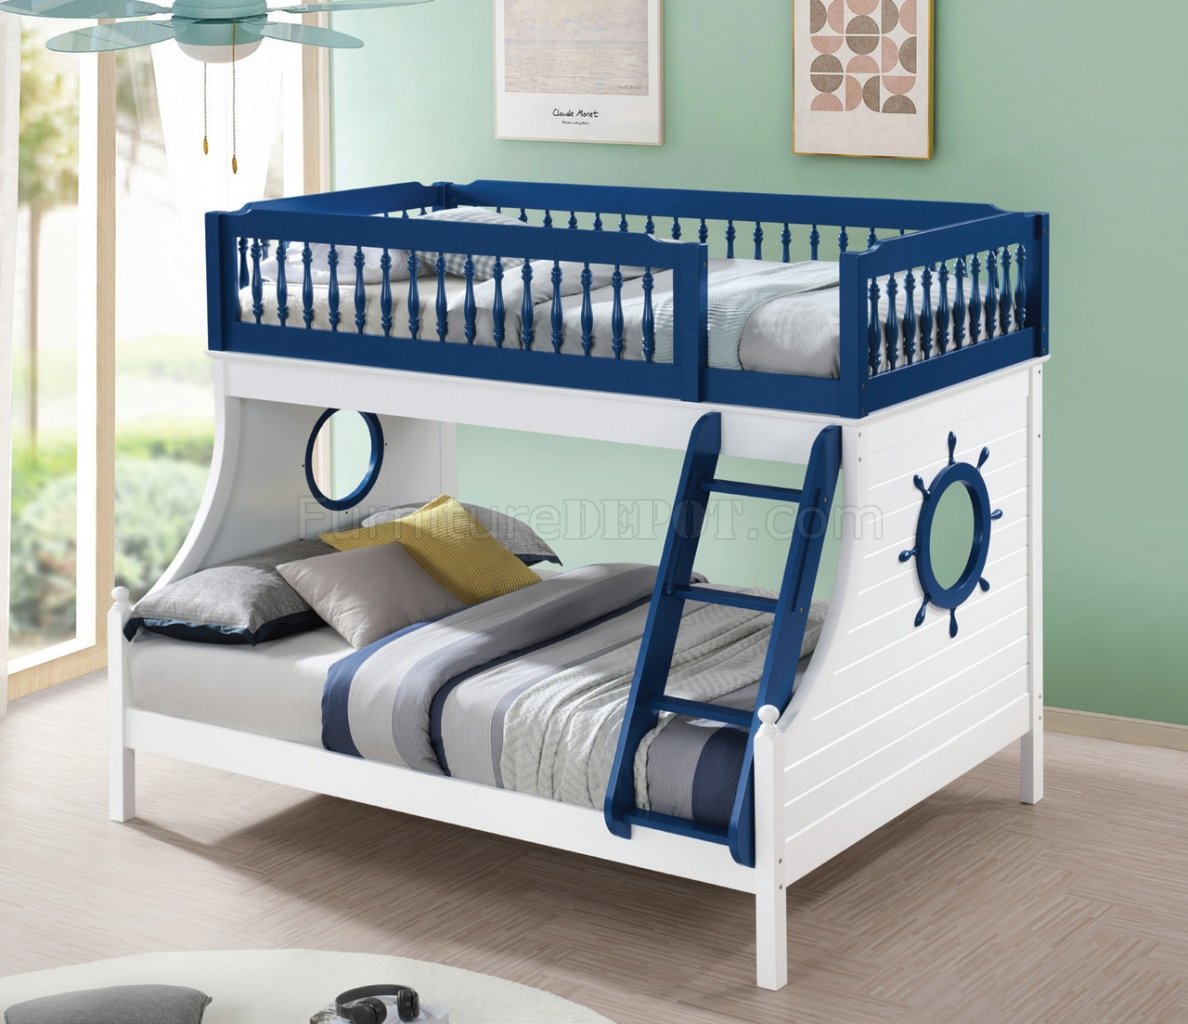 Farah Bunk Bed Bd00493 In White Navy, Navy Bunk Beds